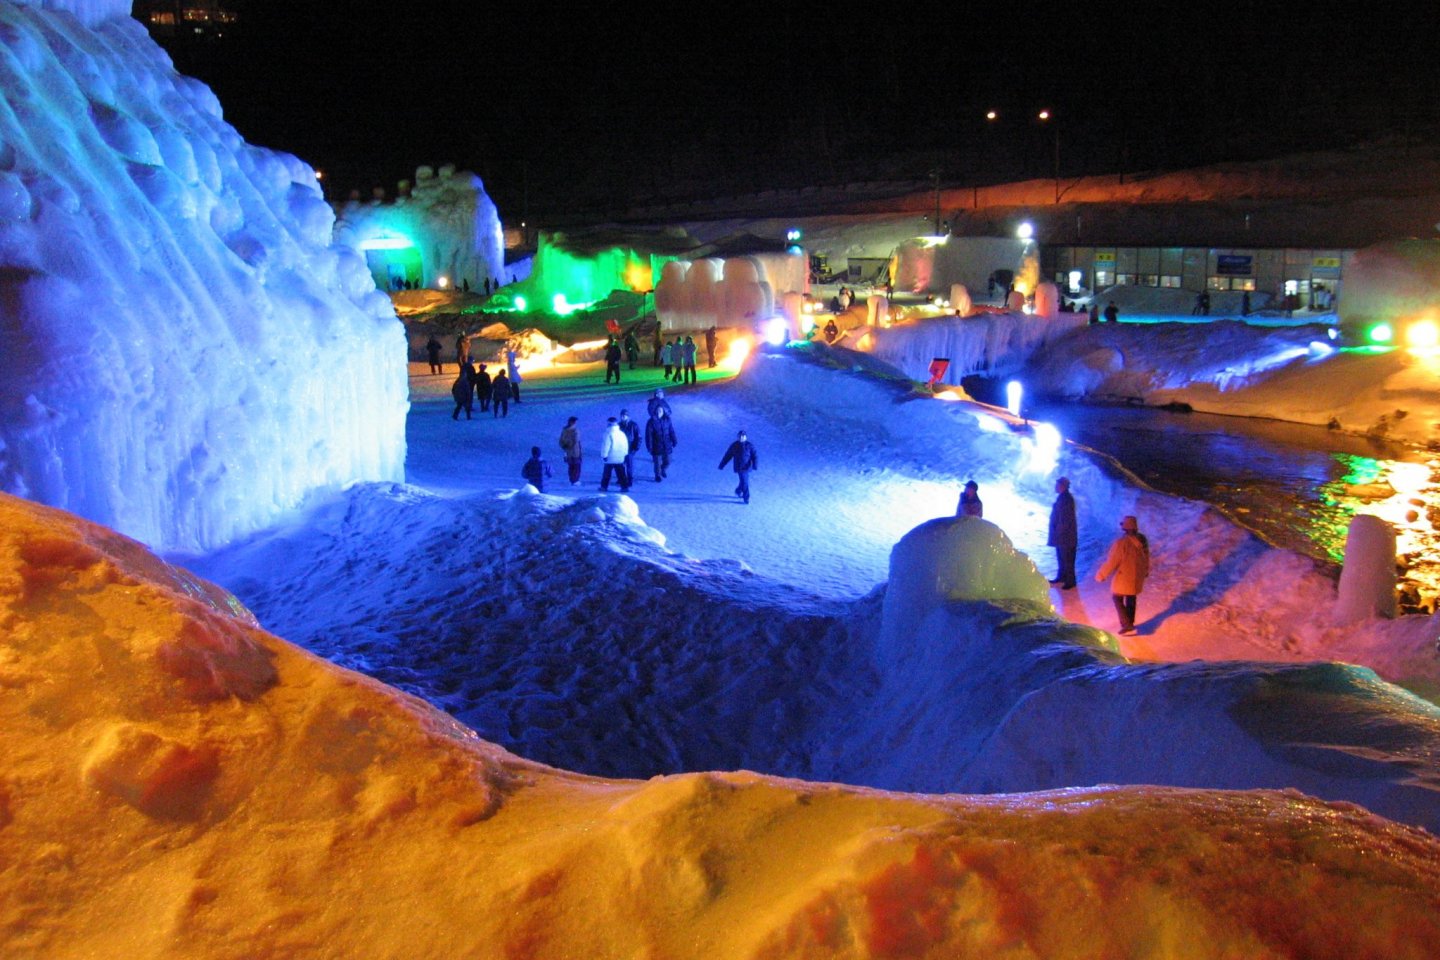 Colorful lights illuminating the ice sculptures